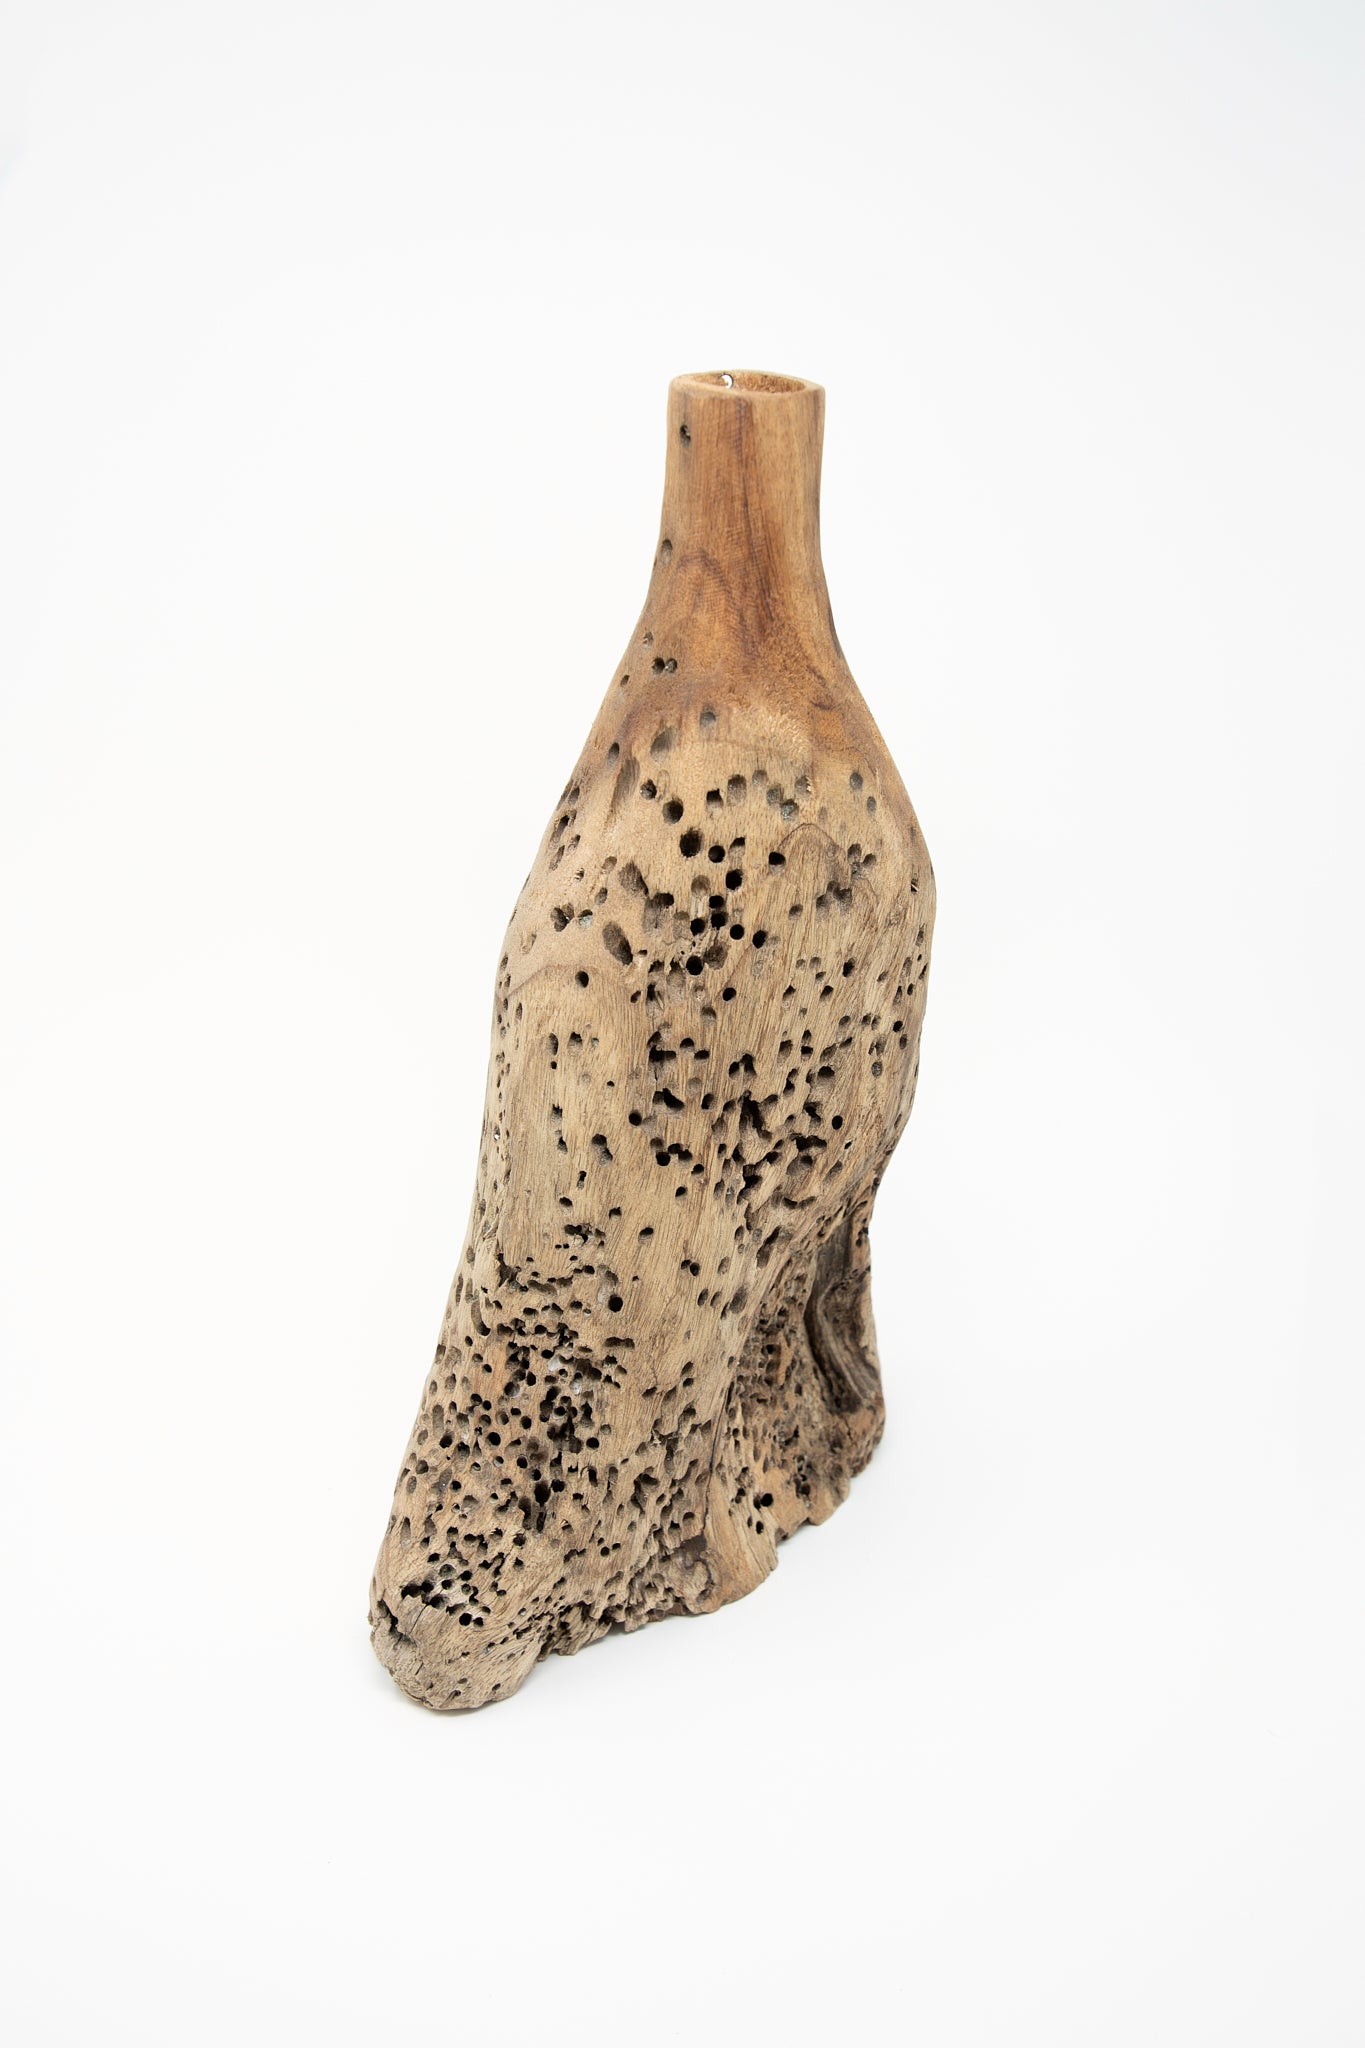 A Pajara driftwood sculpture in Caracoli by Plaza Bolivar with holes in it on a white background.